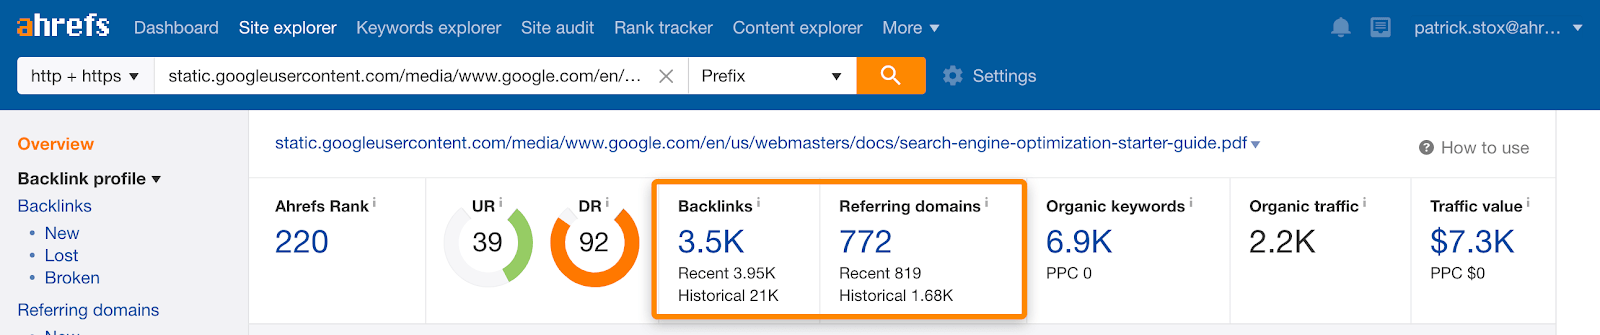 2 backlinks and rds